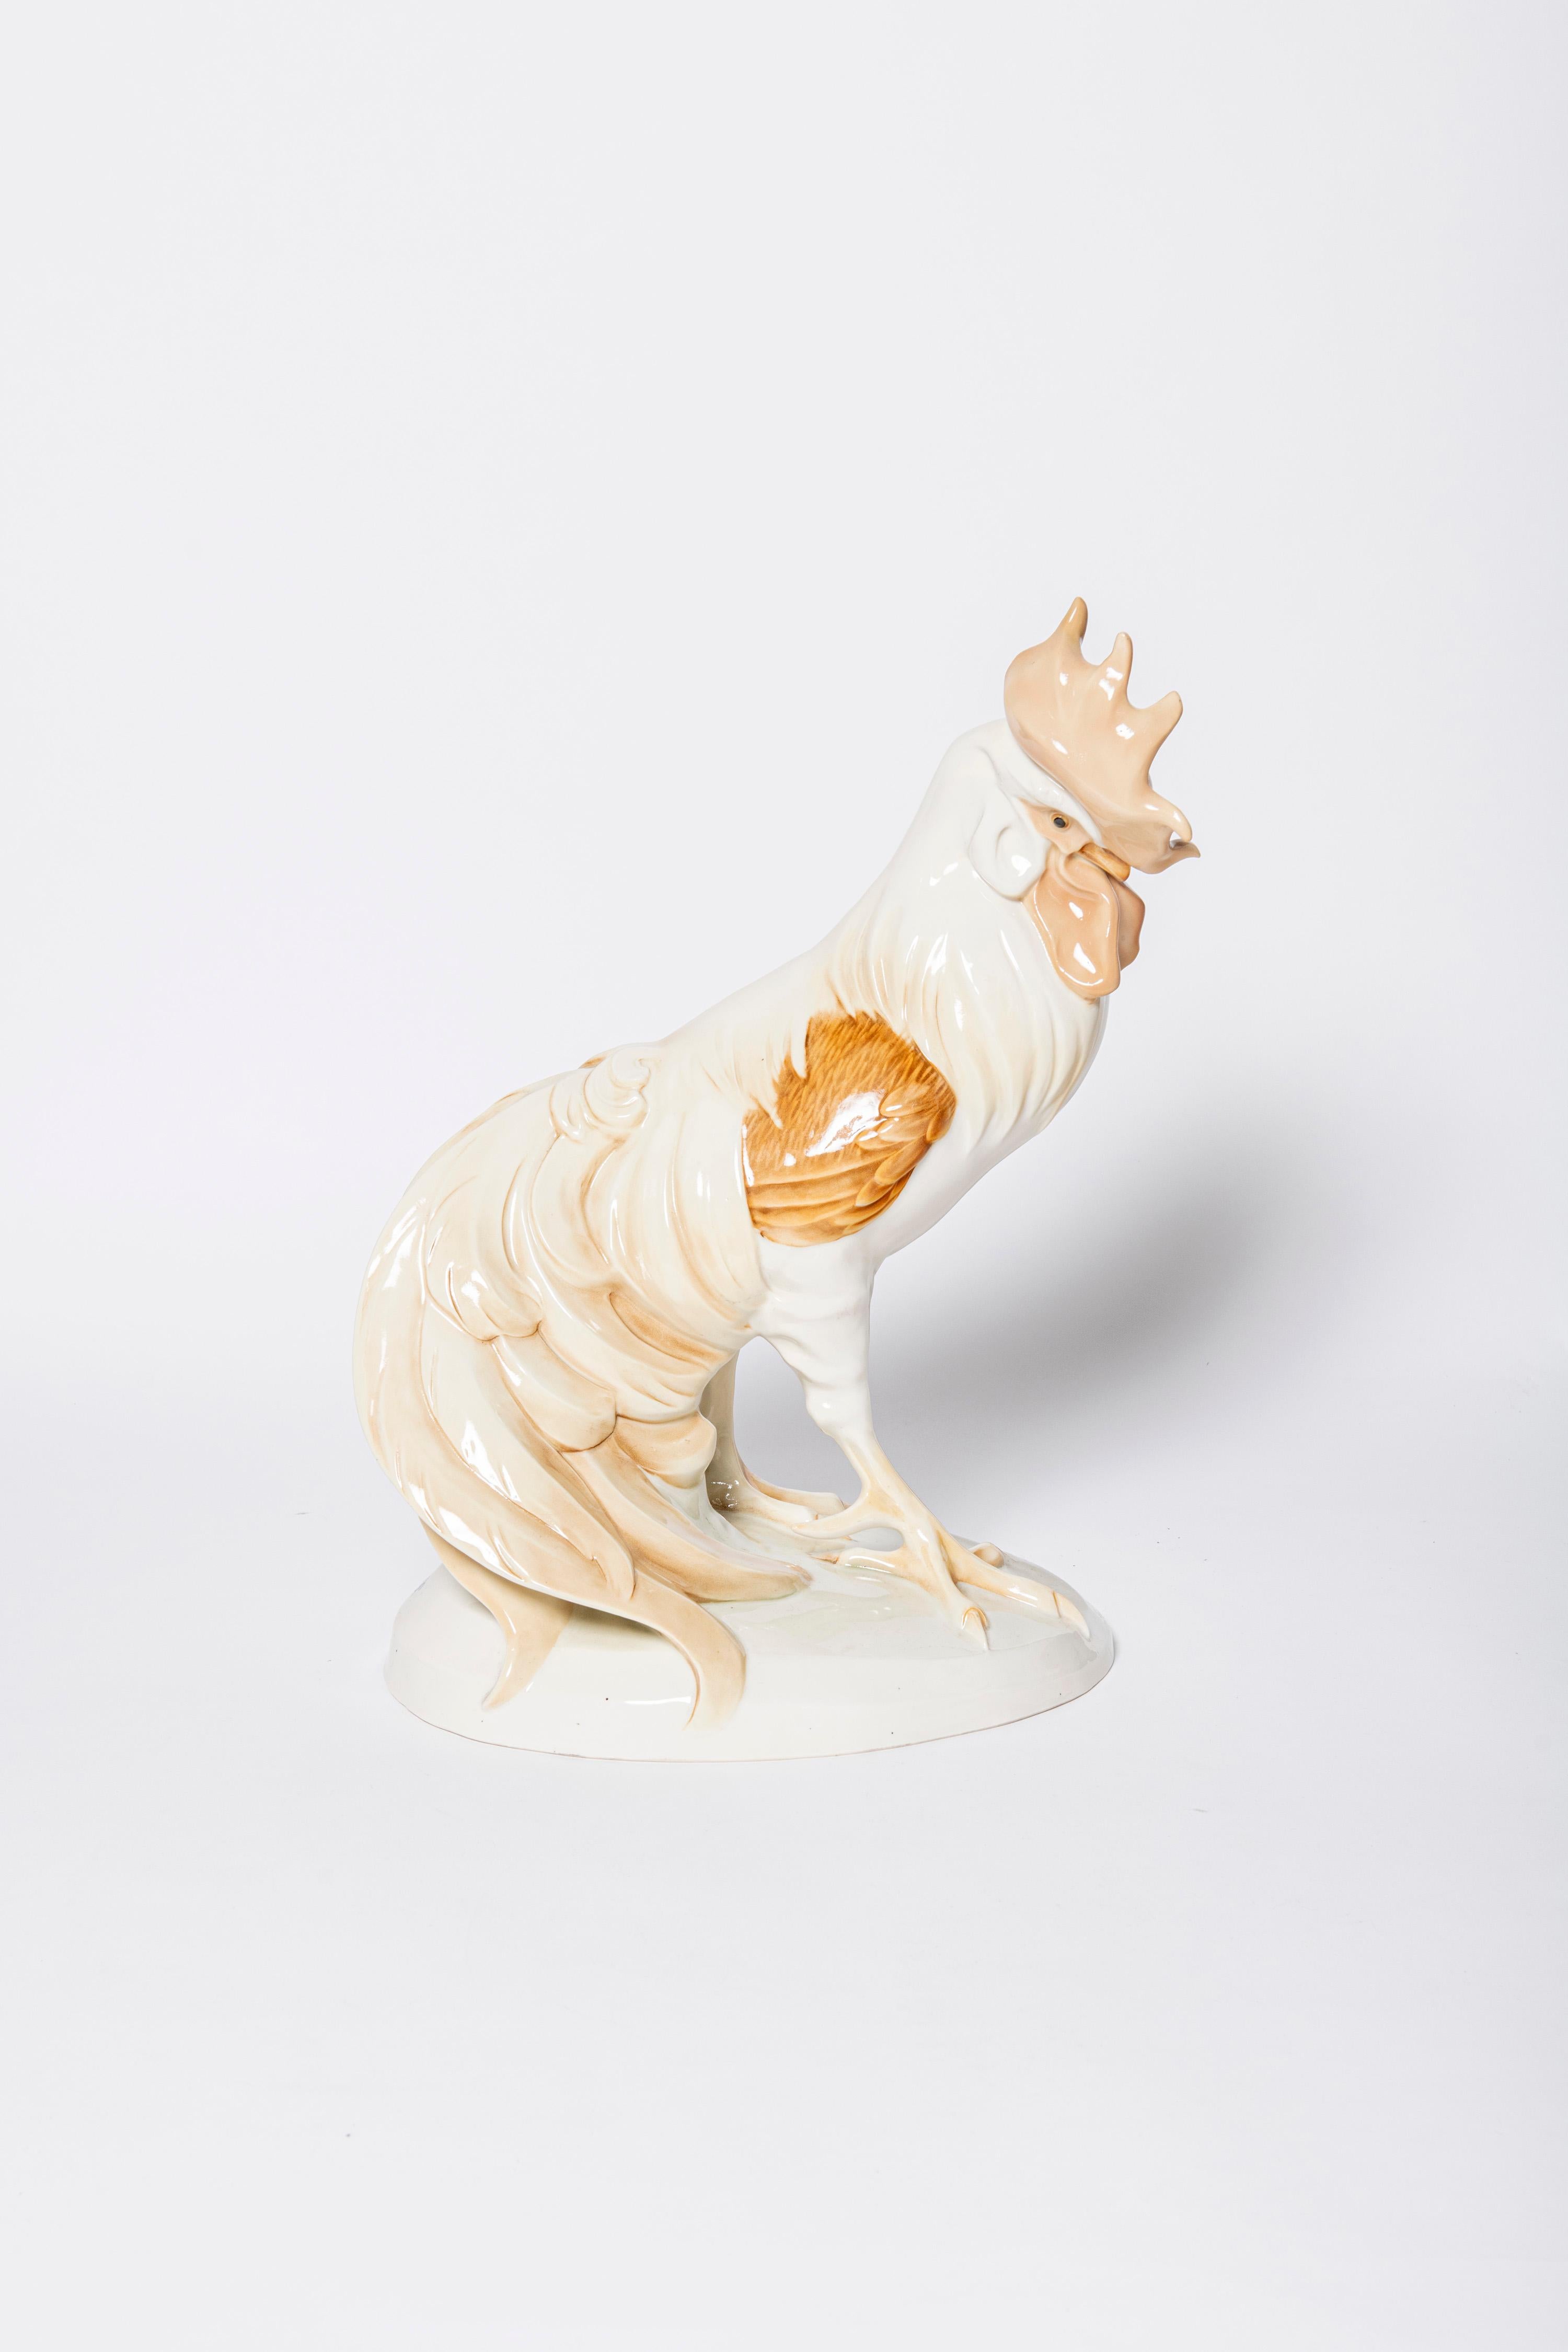 Porcelain rooster. Germany, early 20th century.
Signed F. Eisenhofer.